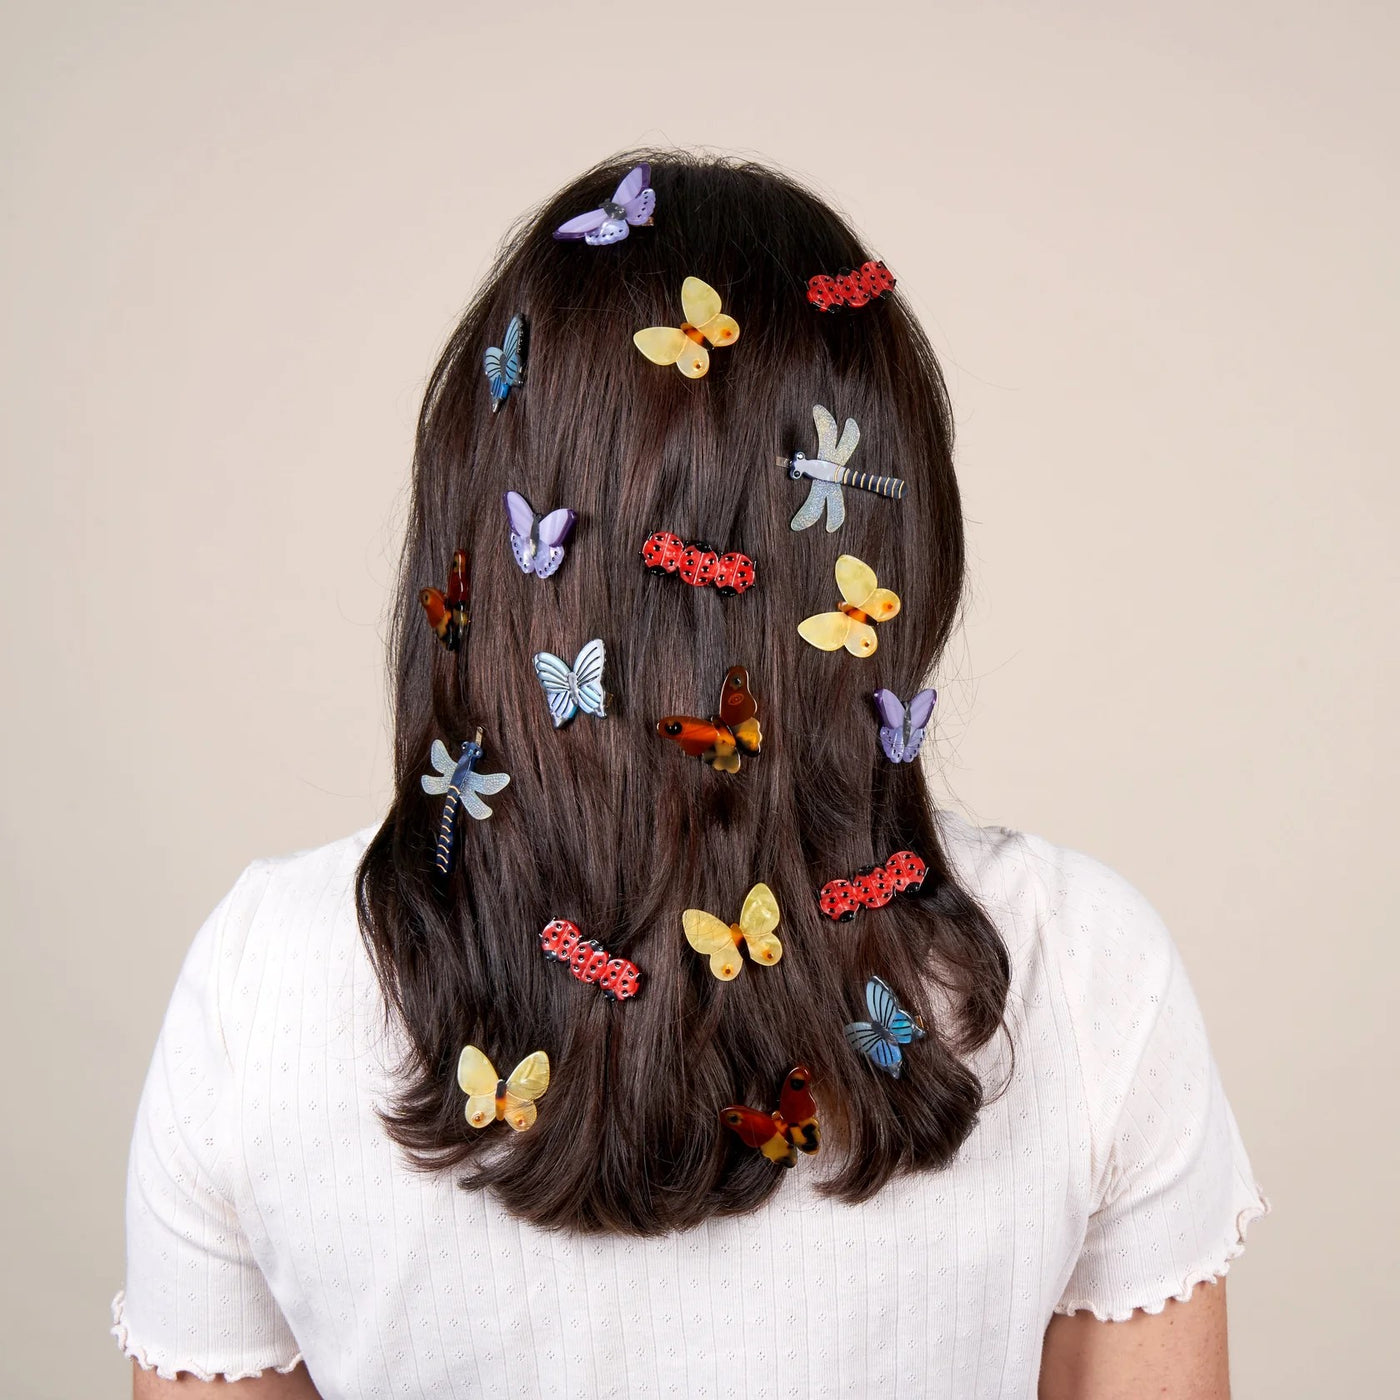 【Coucou Suzette】Moth Hair Clip モスヘアクリップ  | Coucoubebe/ククベベ